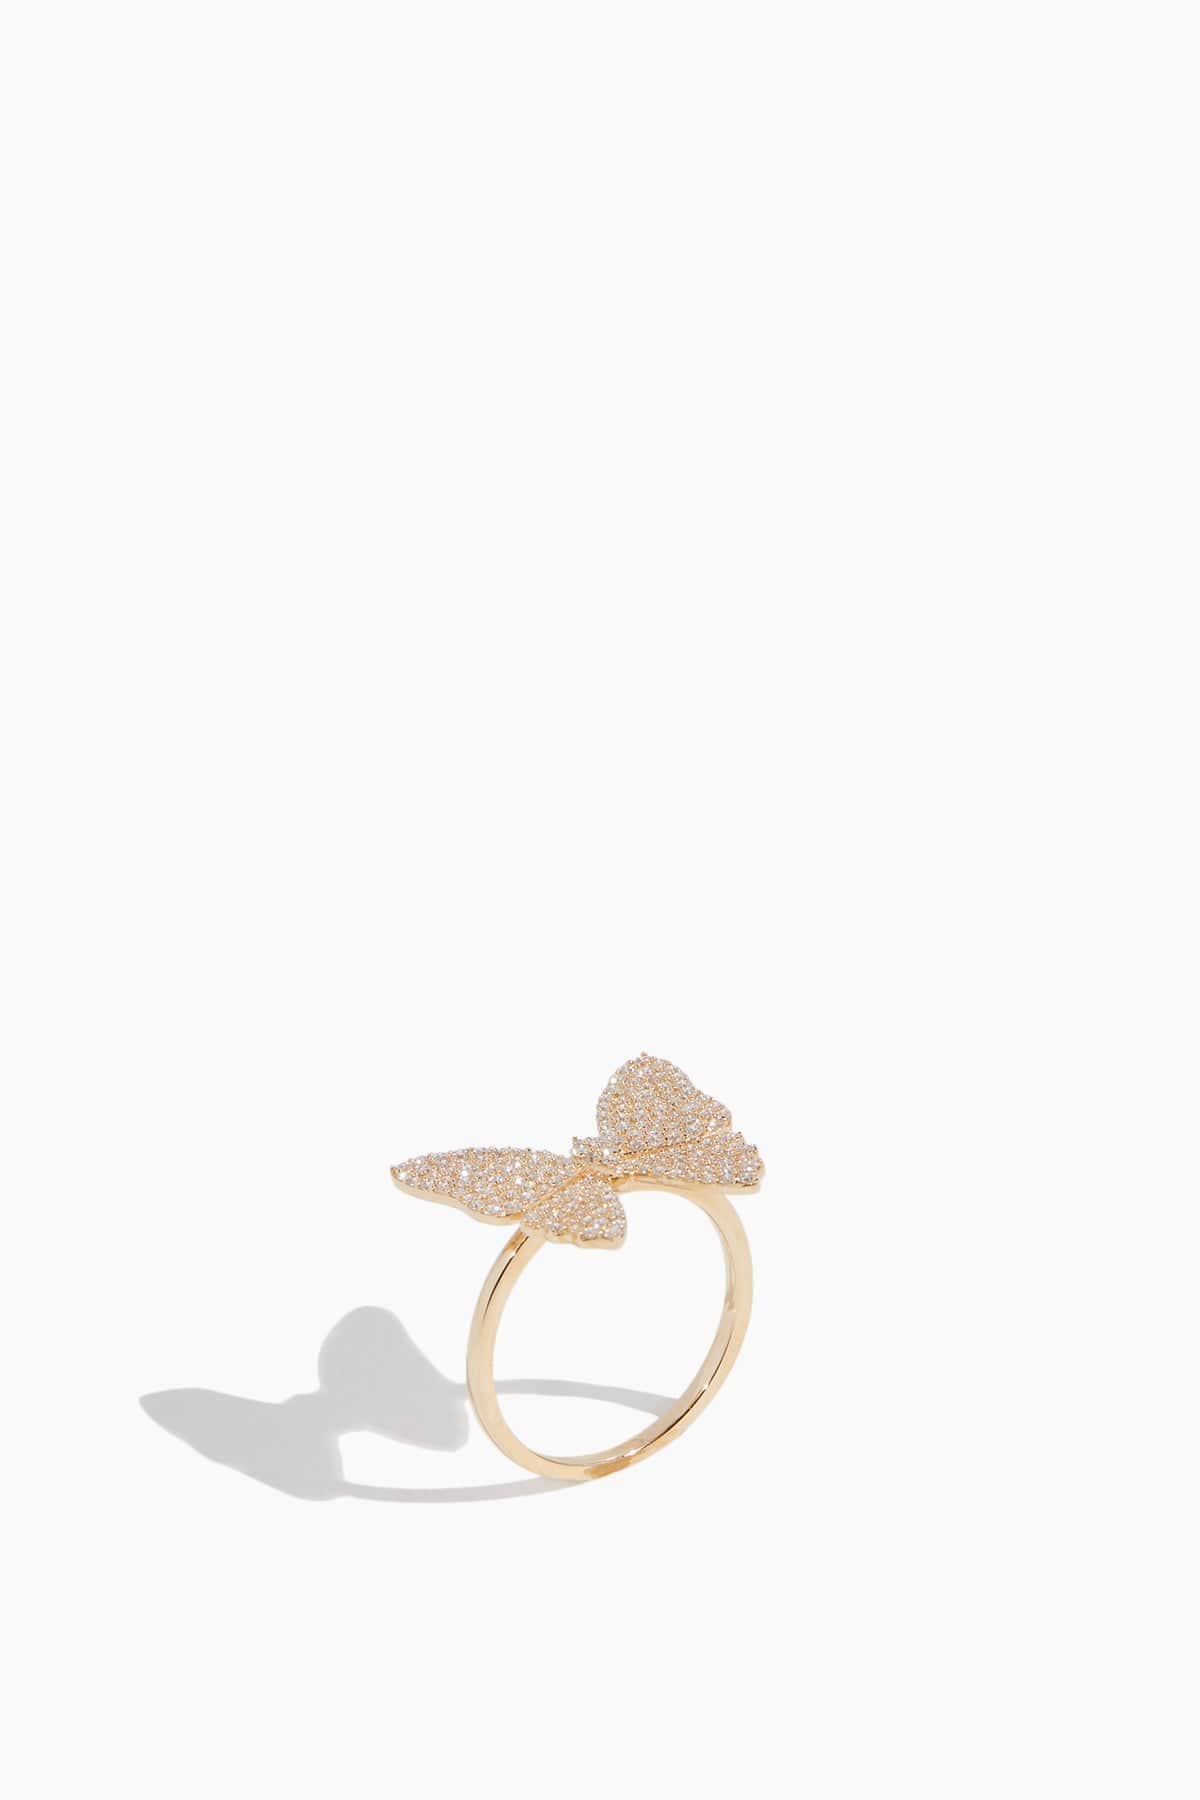 Vintage La Rose Rings Pave Butterfly Ring in 14k Yellow Gold Vintage La Rose Pave Butterfly Ring in 14k Yellow Gold